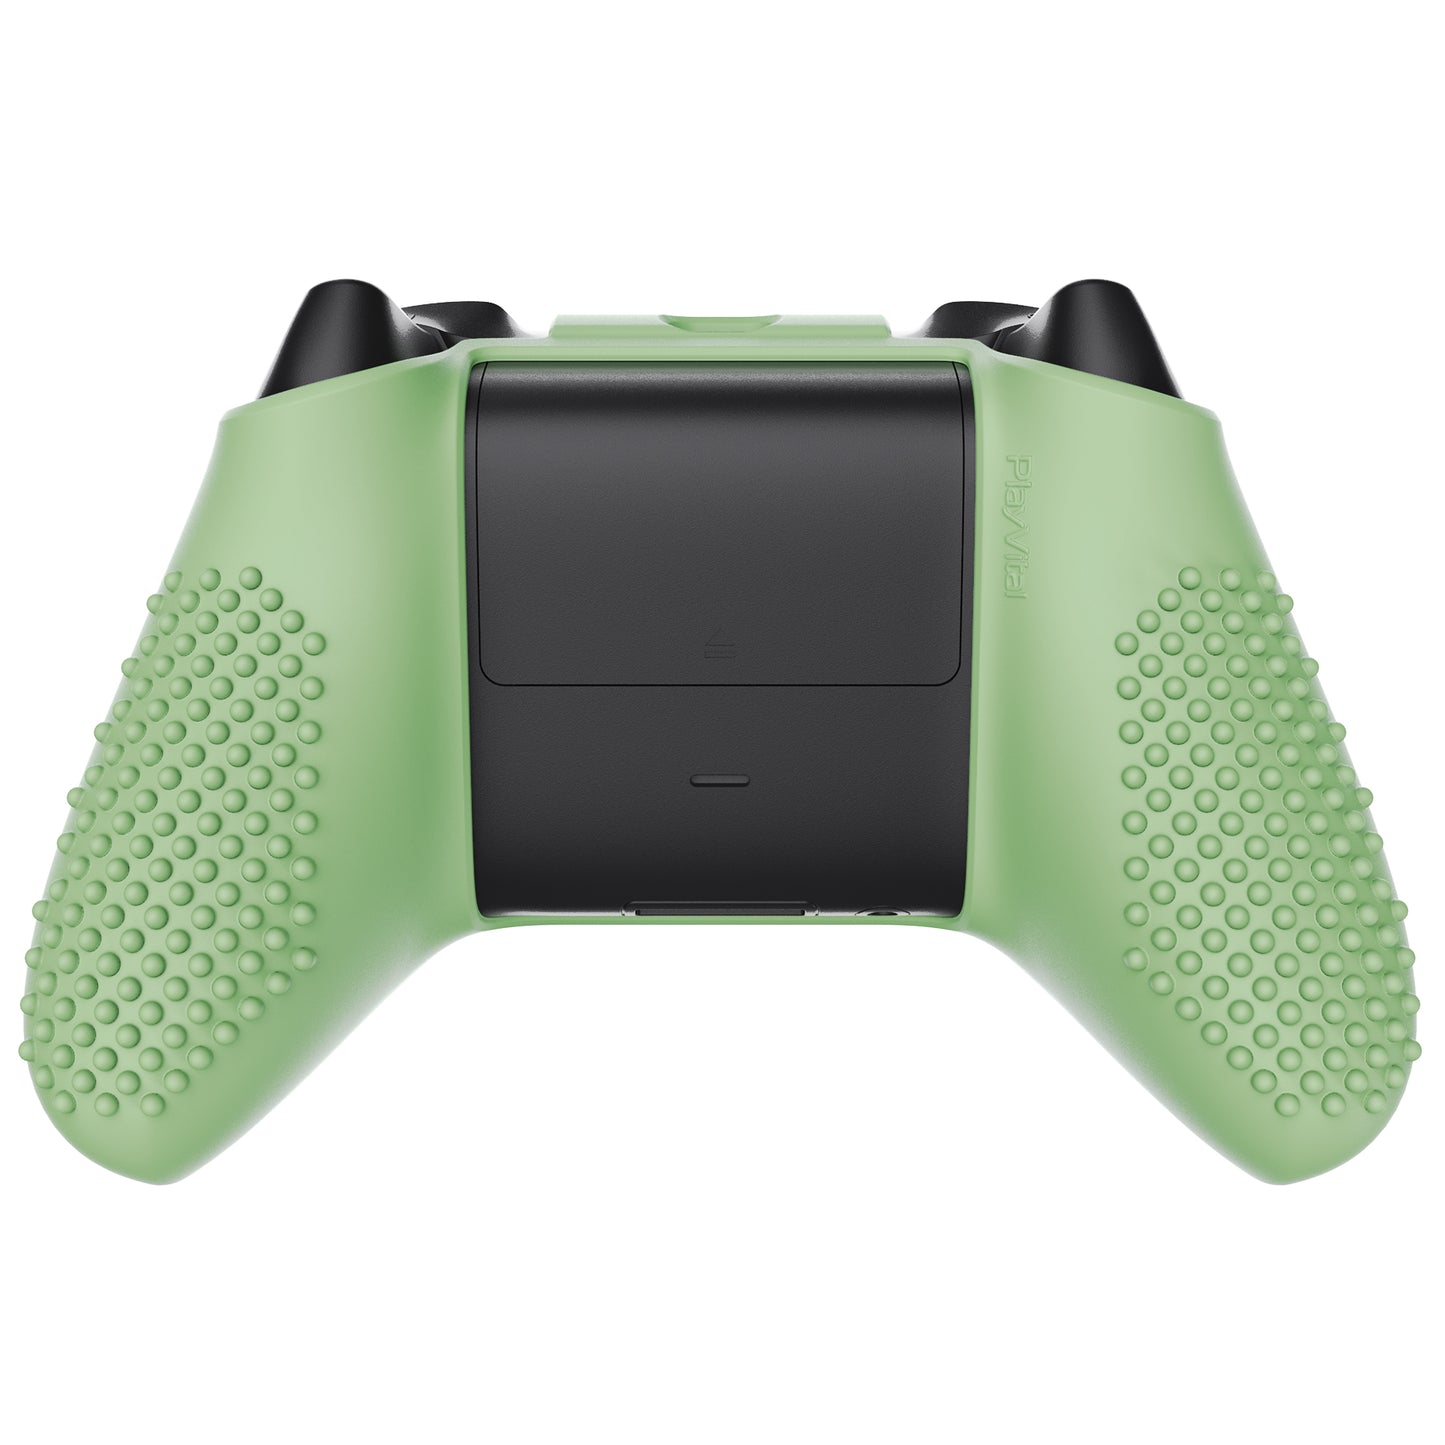 PlayVital Matcha Green 3D Studded Edition Anti-slip Silicone Cover Skin for Xbox Series X Controller, Soft Rubber Case Protector for Xbox Series S Controller with 6 Black Thumb Grip Caps - SDX3021 PlayVital